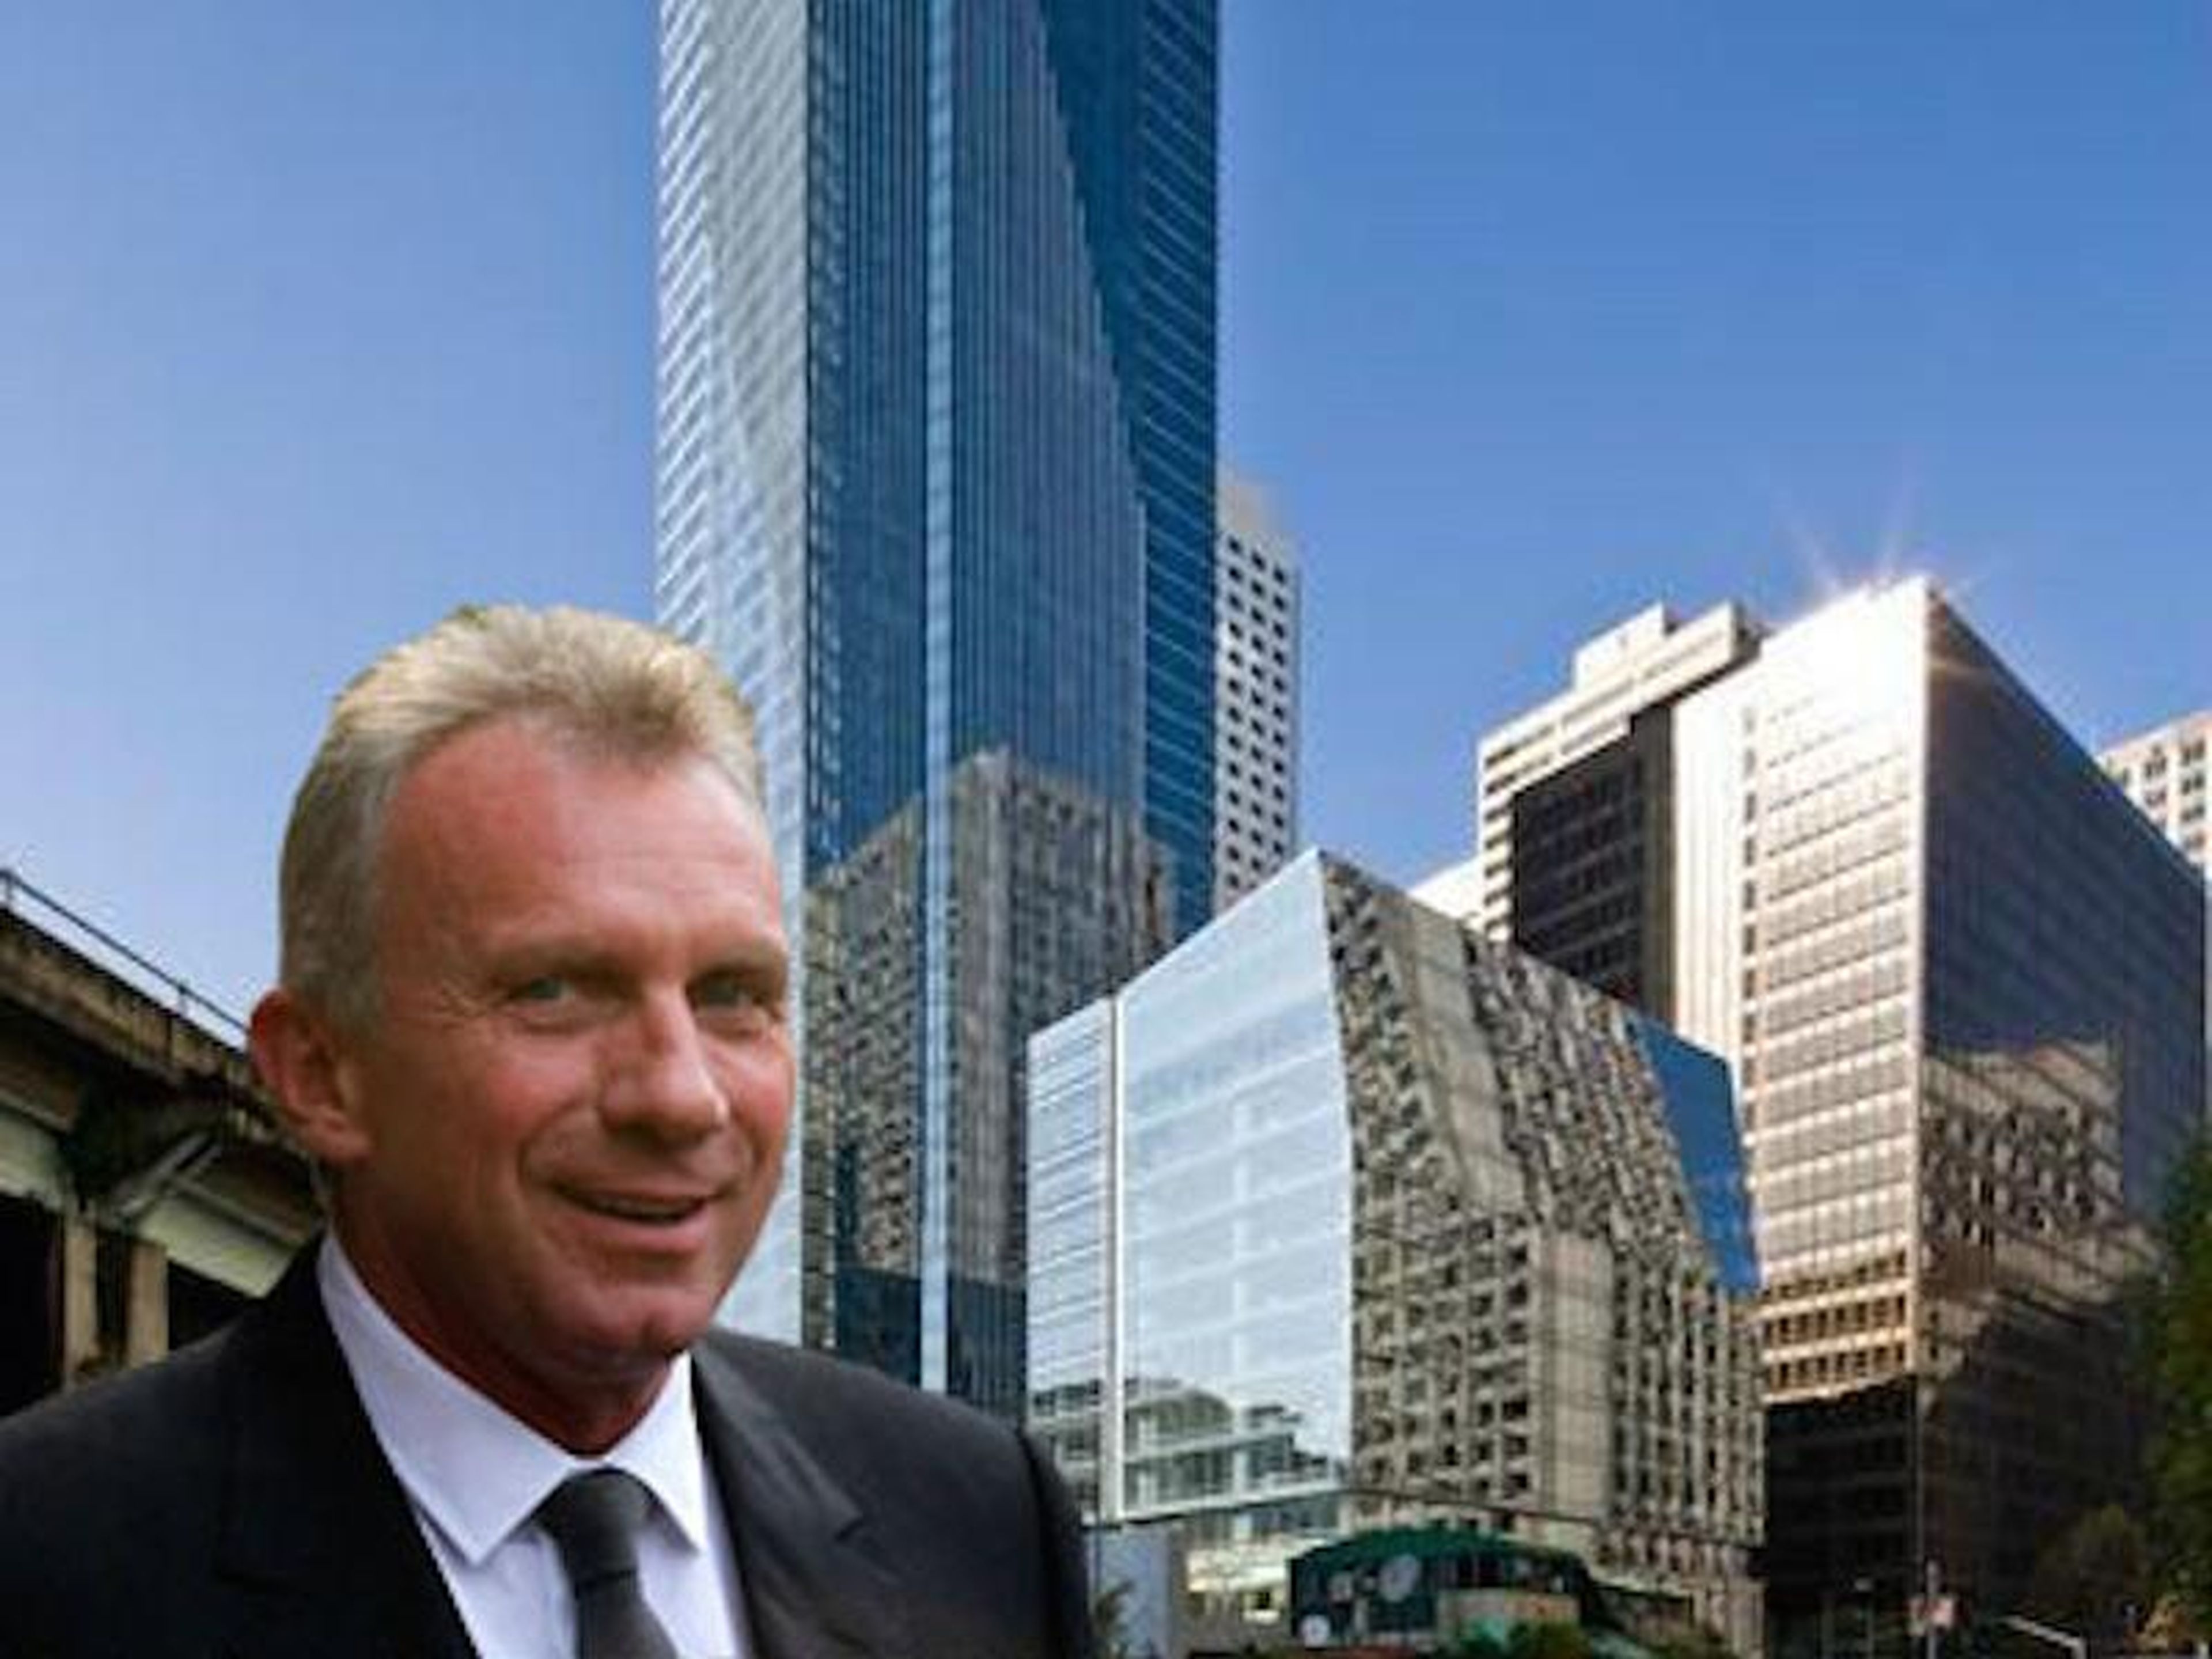 Hall of Famer Joe Montana also sued the developer in May 2017, seeking a $2.7 million reimbursement for his condo and $1 million in "consequential damages."